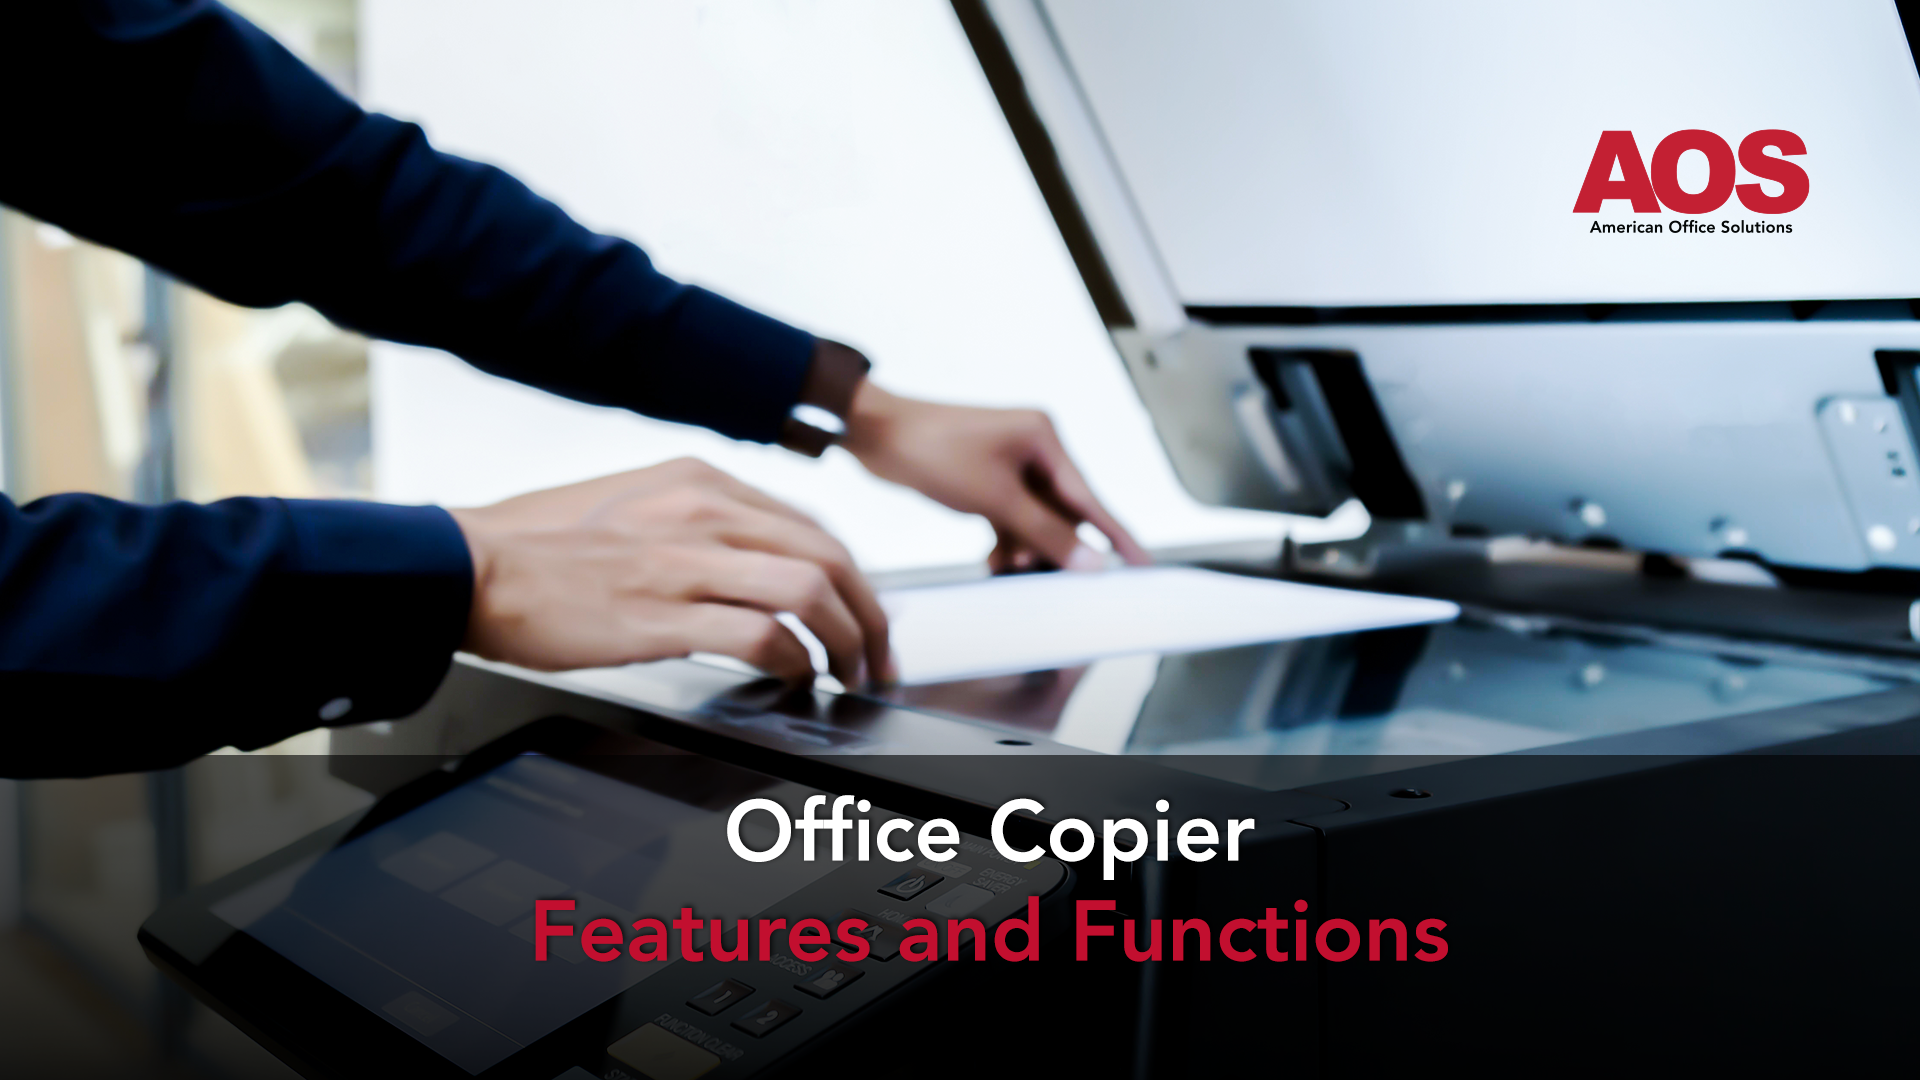 Offie Copier Features and Functions